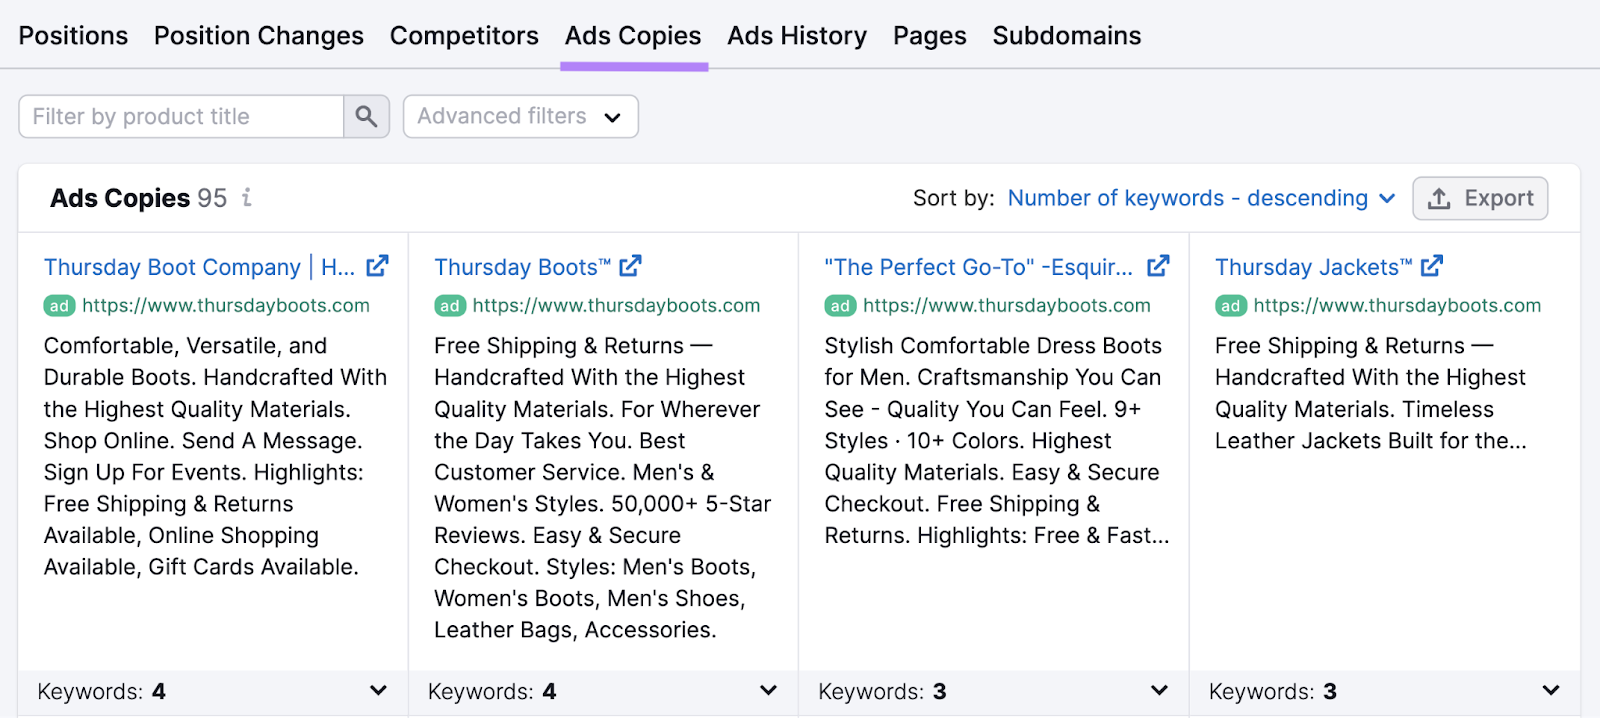 competitors' ads copies shown in Advertising Research tool